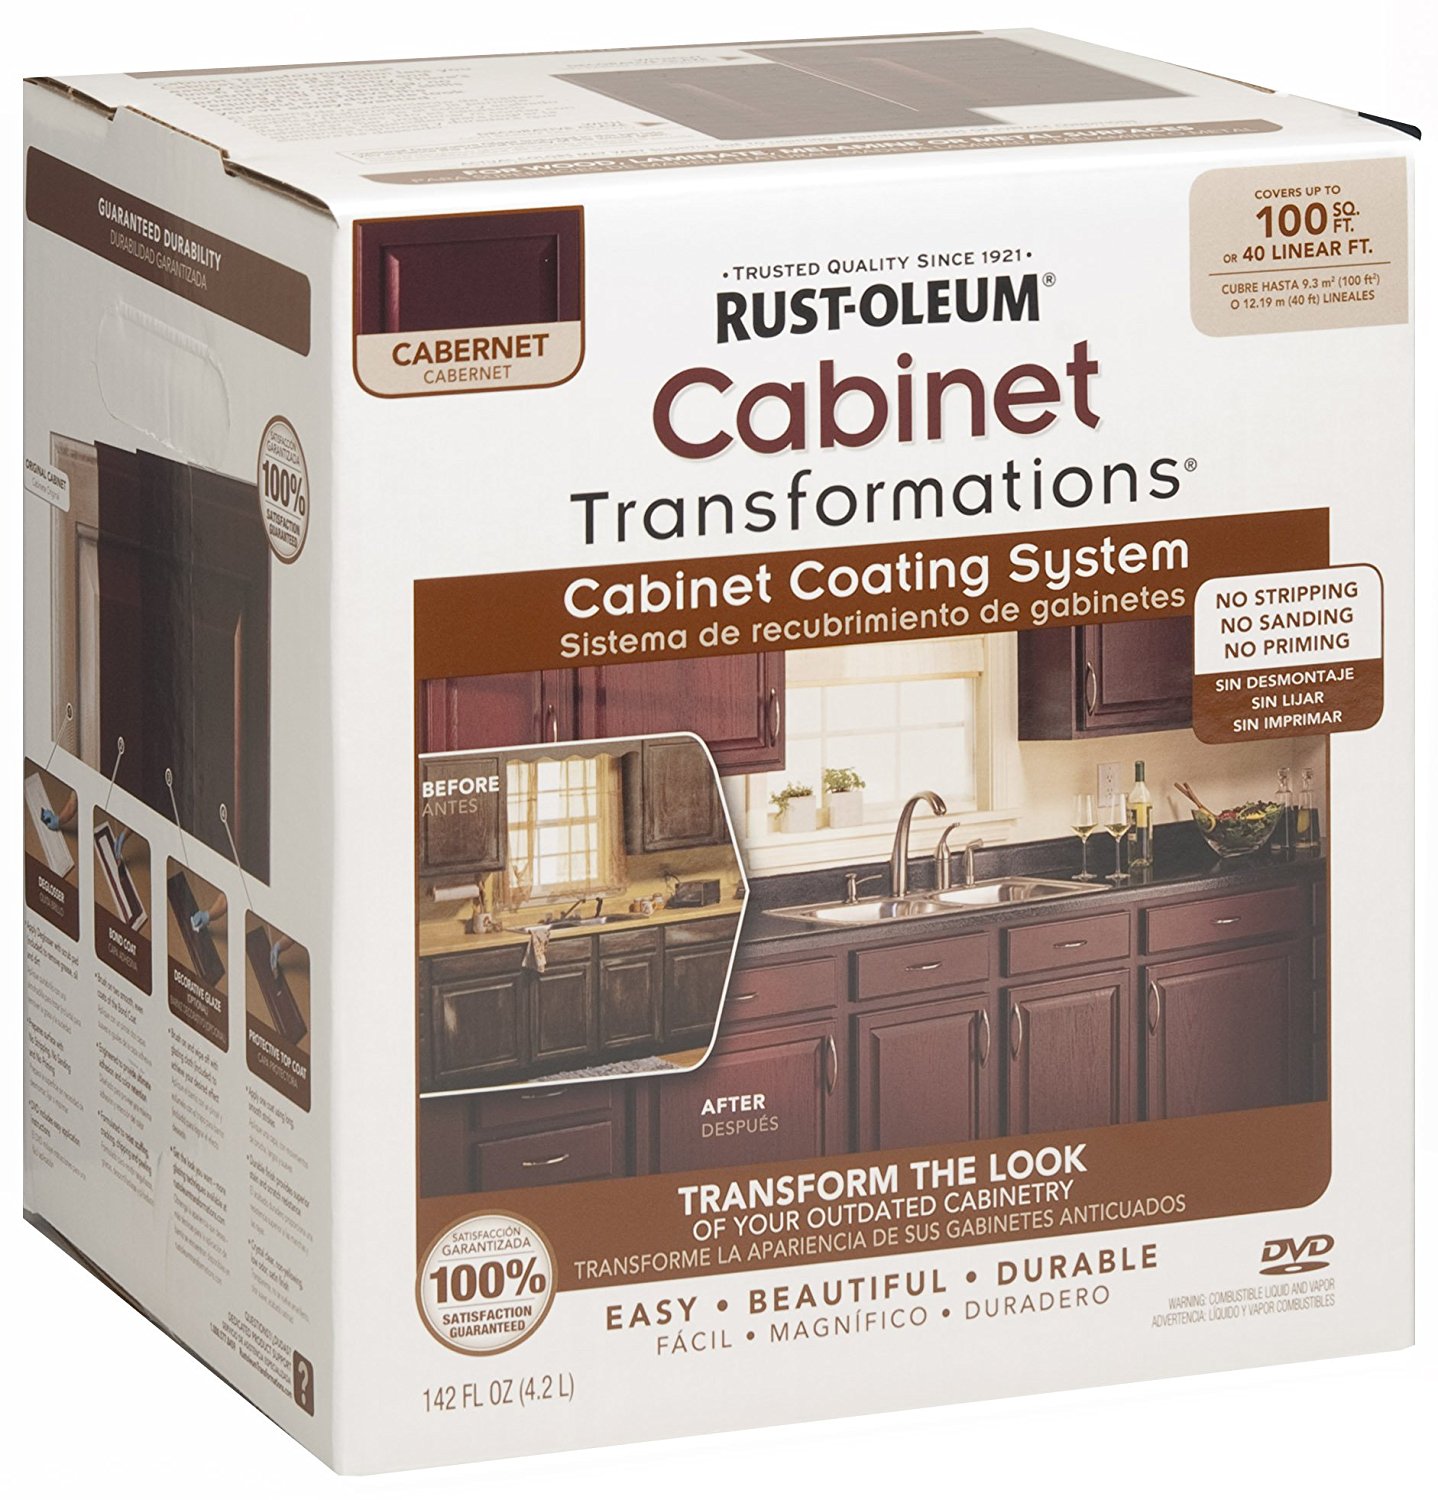 Rust-Oleum 263233 Cabinet Transformations, Small Kit, Cabernet